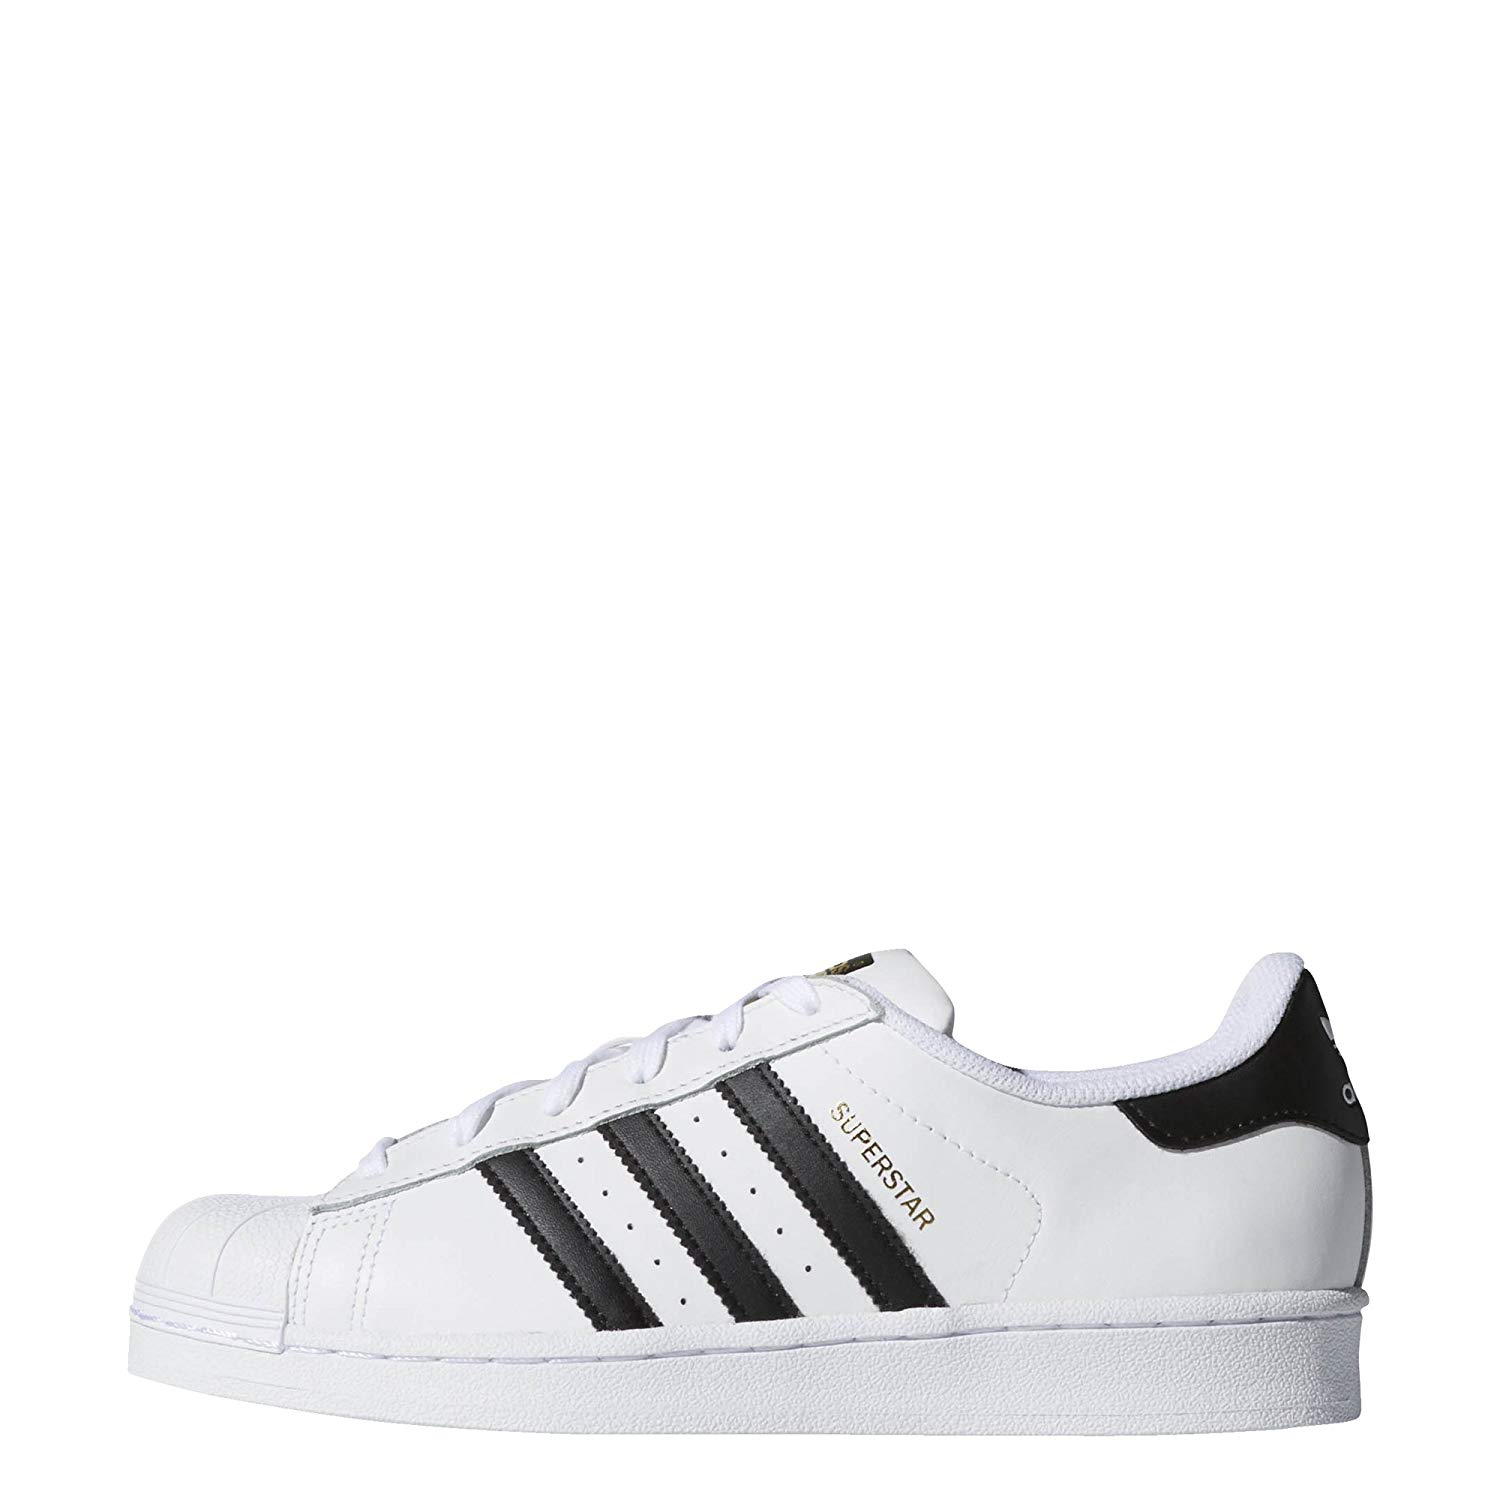 adidas superstar black and white womens 